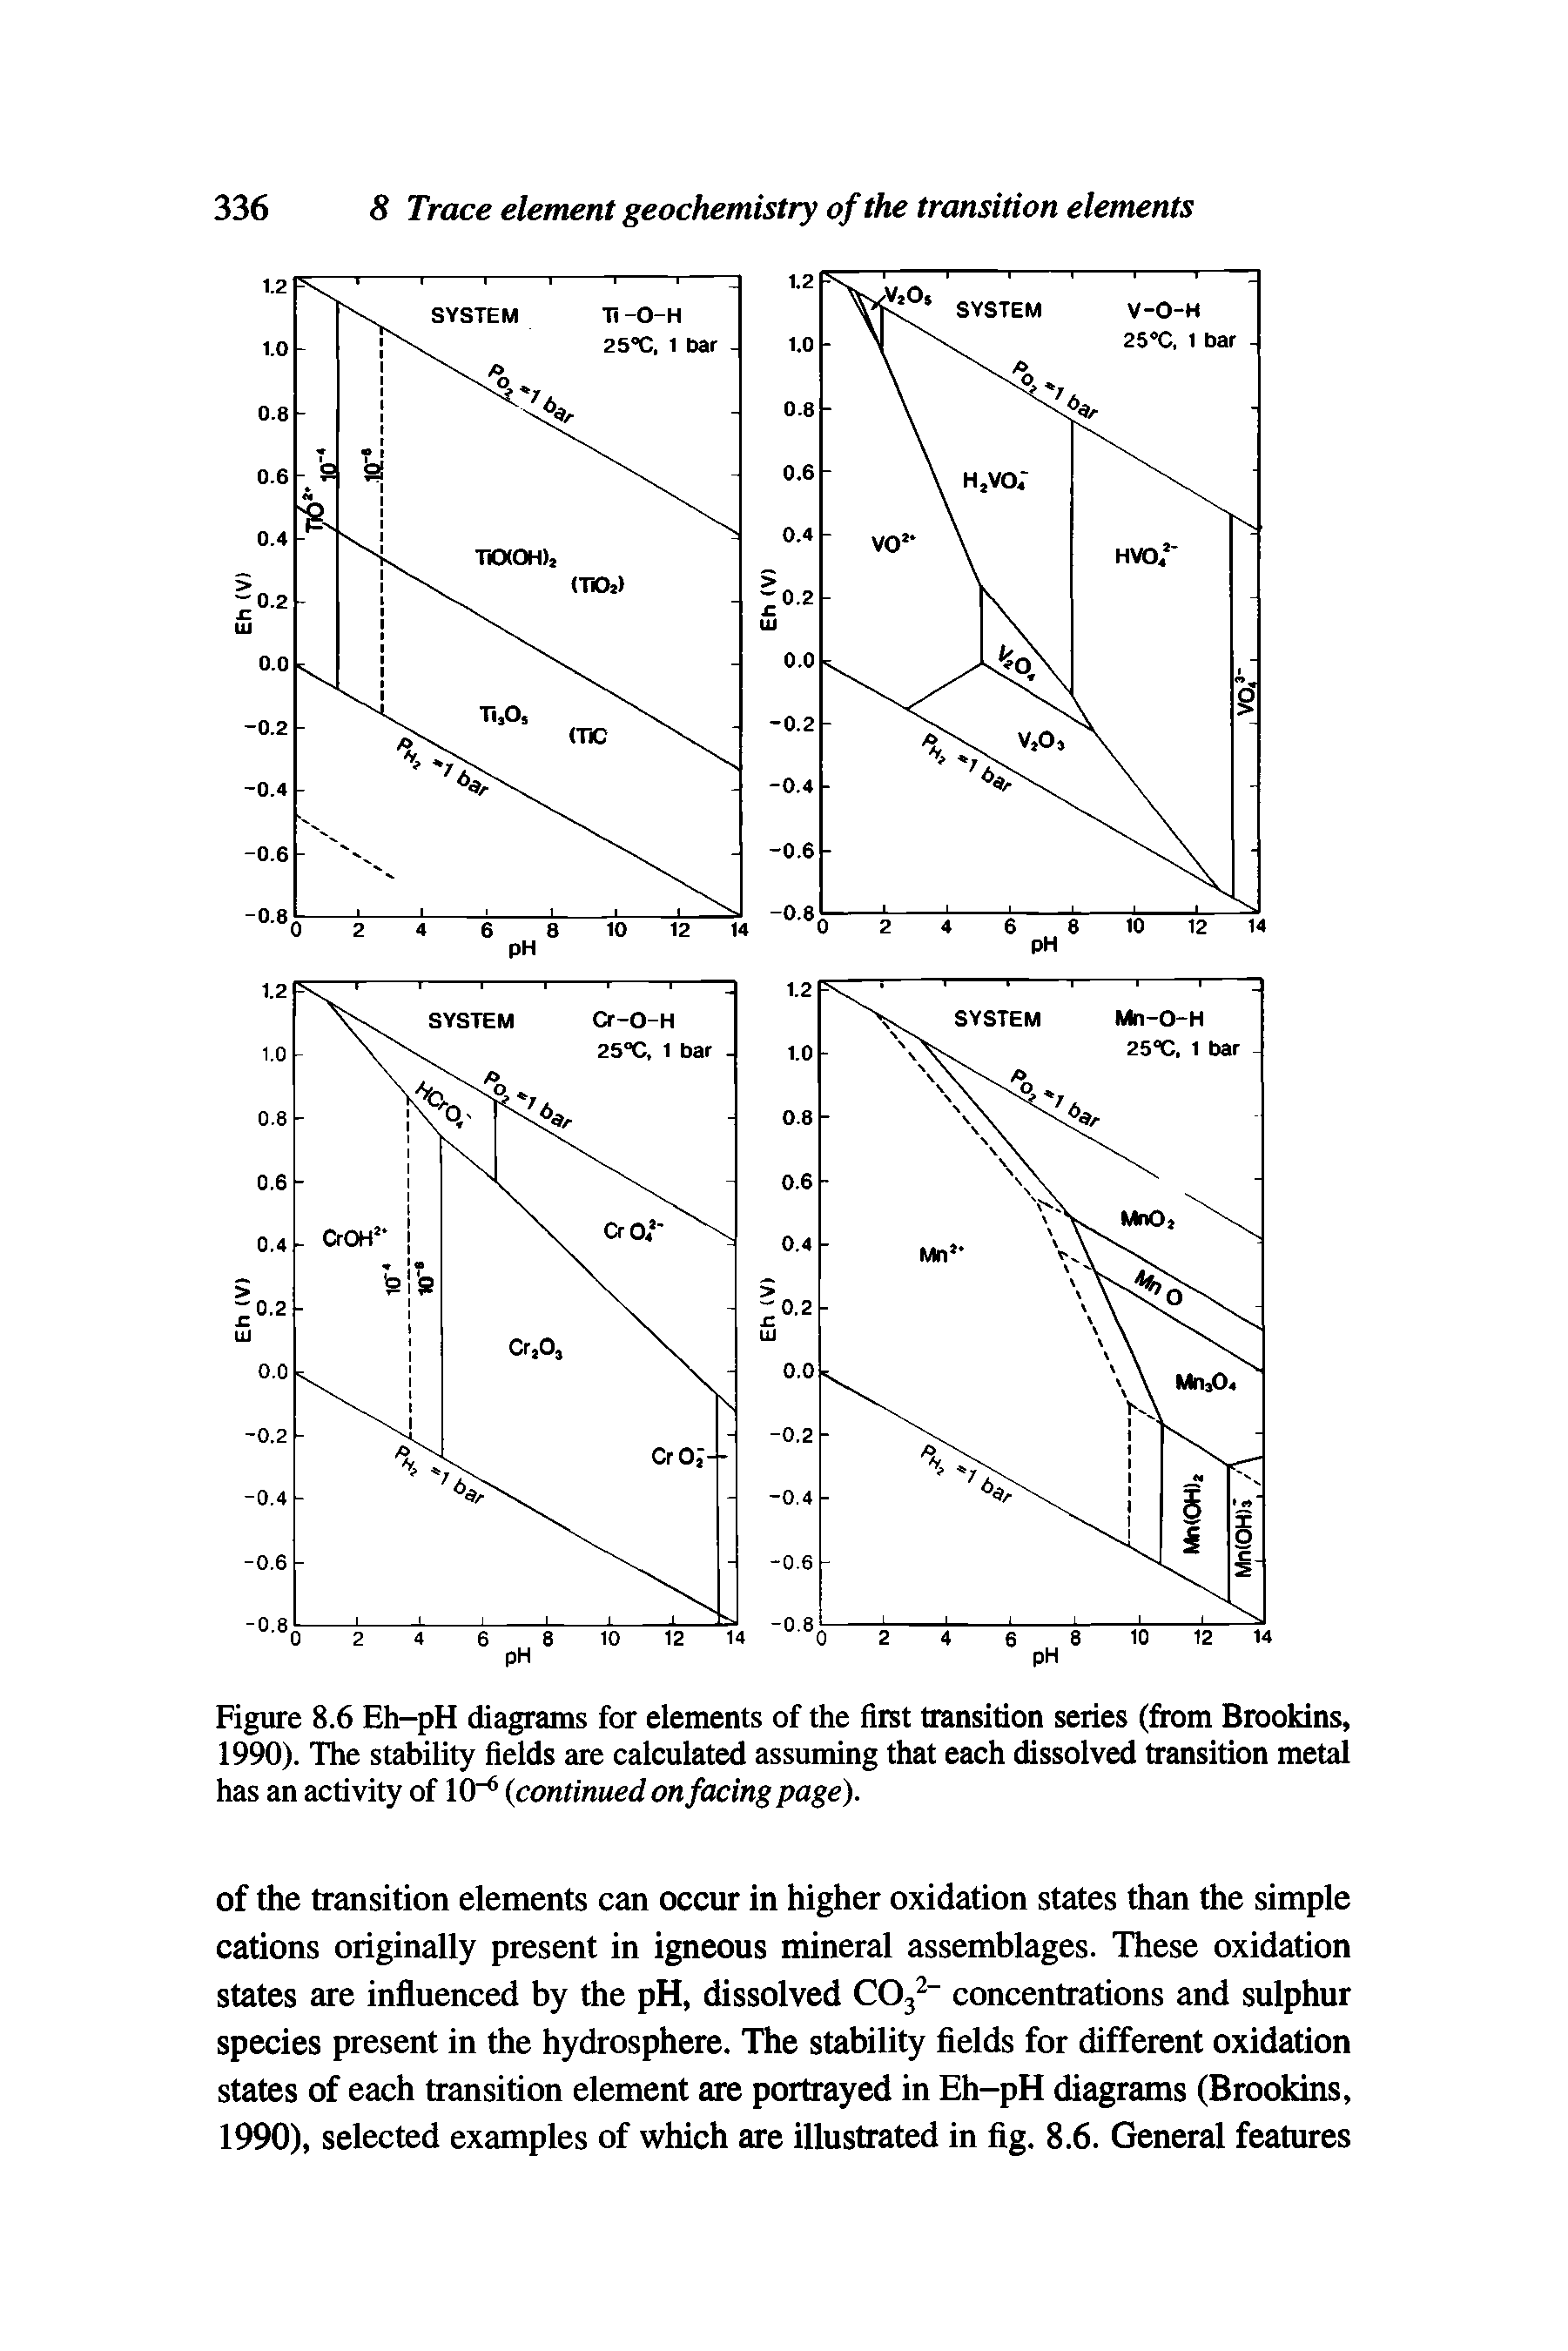 Figure 8.6 Eh-pH diagrams for elements of the first transition series (from Brookins, 1990). The stability fields are calculated assuming that each dissolved transition metal has an activity of 10-6 (continued on facing page).